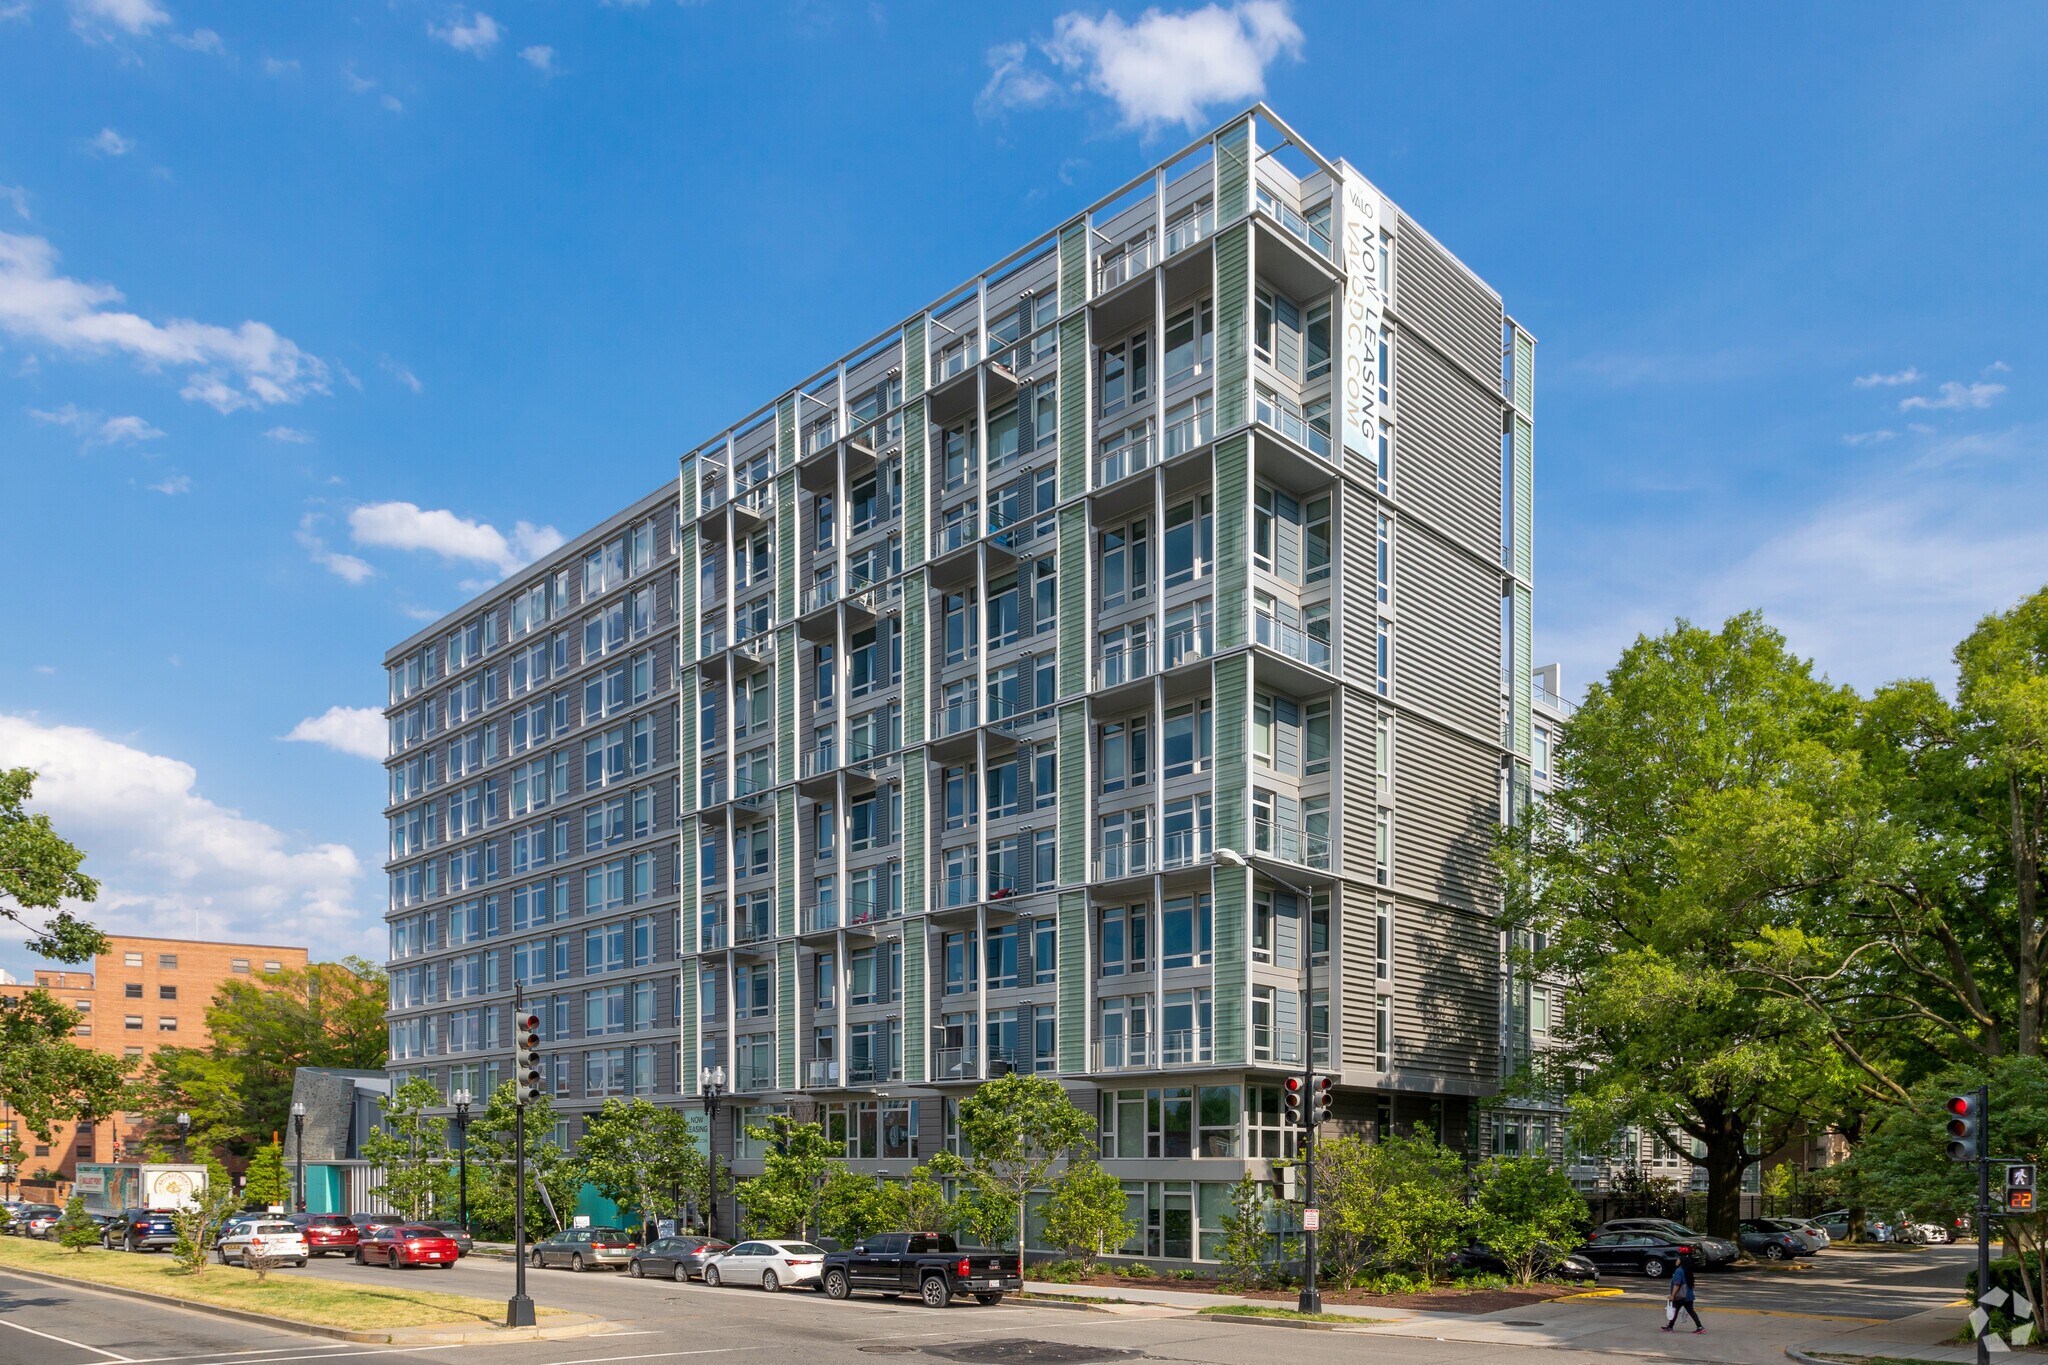 Bernstein Management has acquired Valo, a 221-unit apartment complex constructed on the site of an old church. (CoStar)